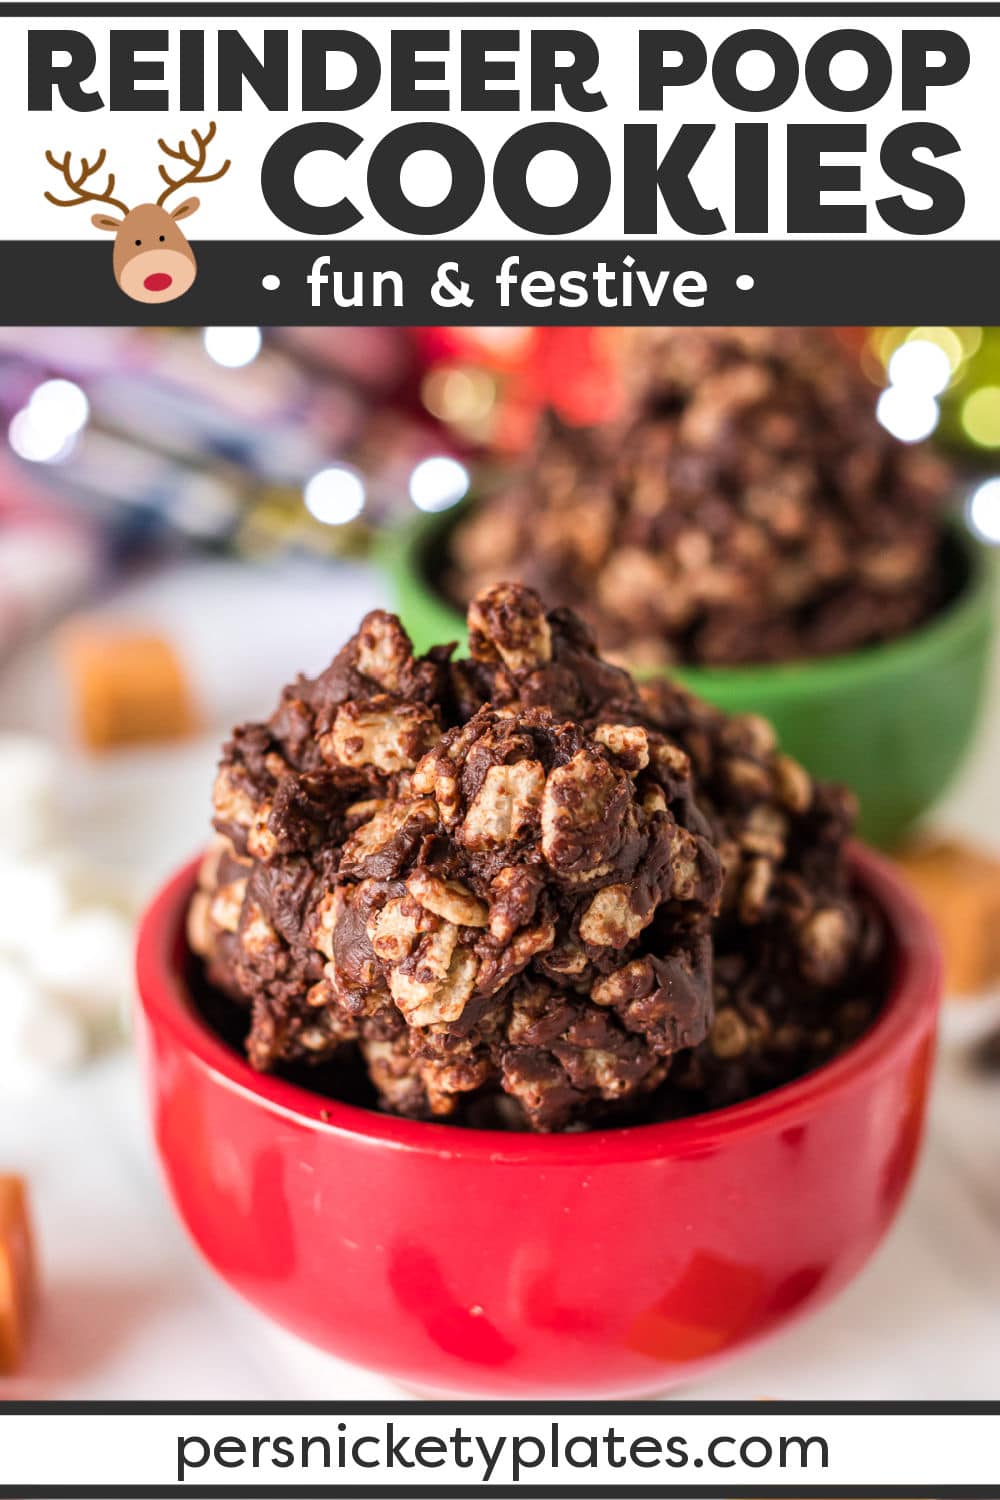 These Reindeer Poop Cookies will make kids and adults snicker while also being your new favorite no-bake Christmas cookie! Filled with chewy caramels, marshmallows, rice krispies, and a deep chocolatey flavor, these Reindeer Poop cookies are sure to be a hit. | www.persnicketyplates.com